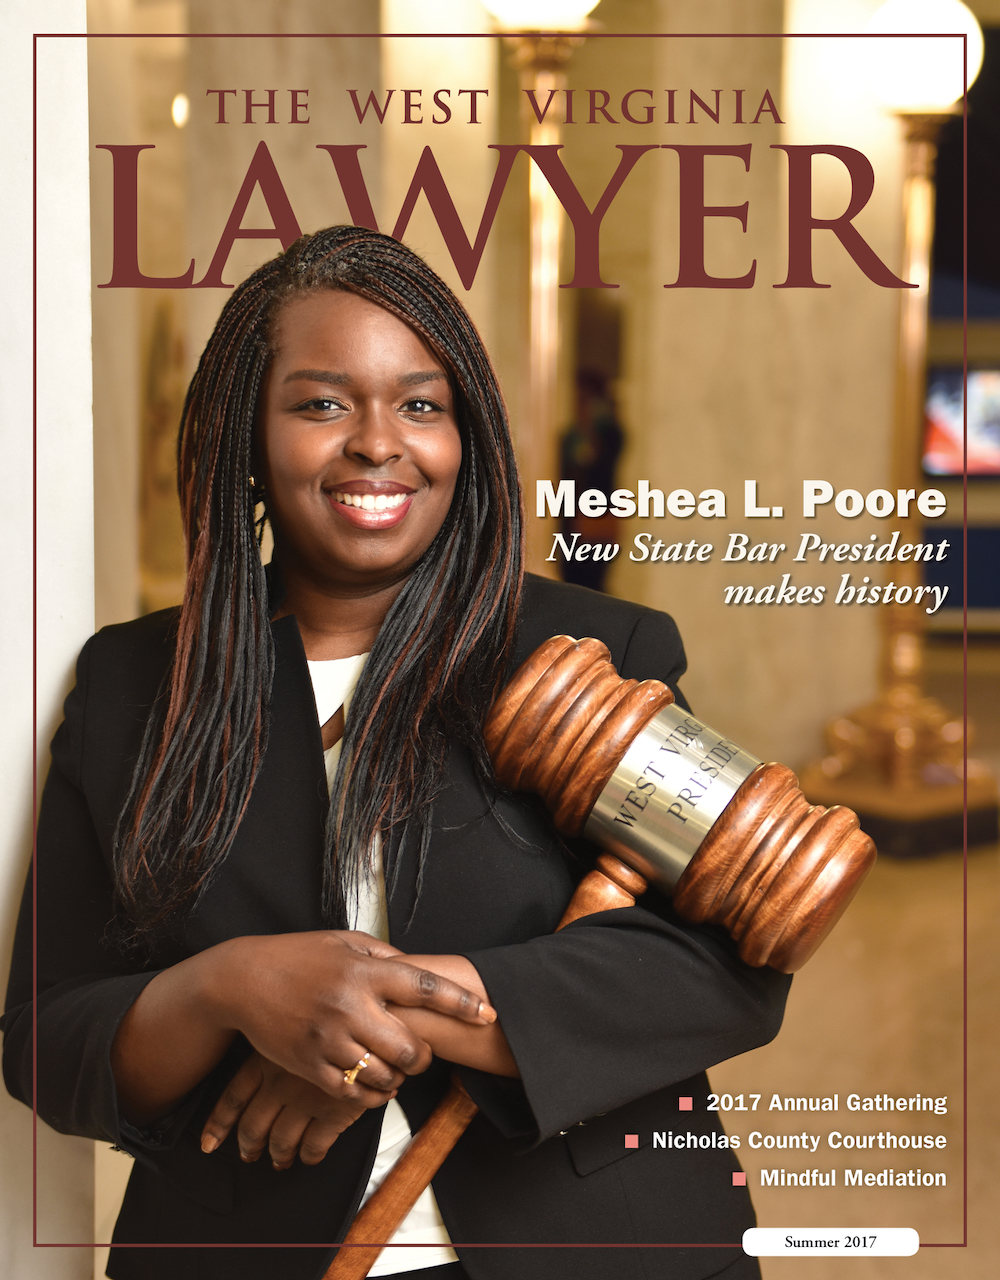 The West Virginia Lawyer magazine cover.